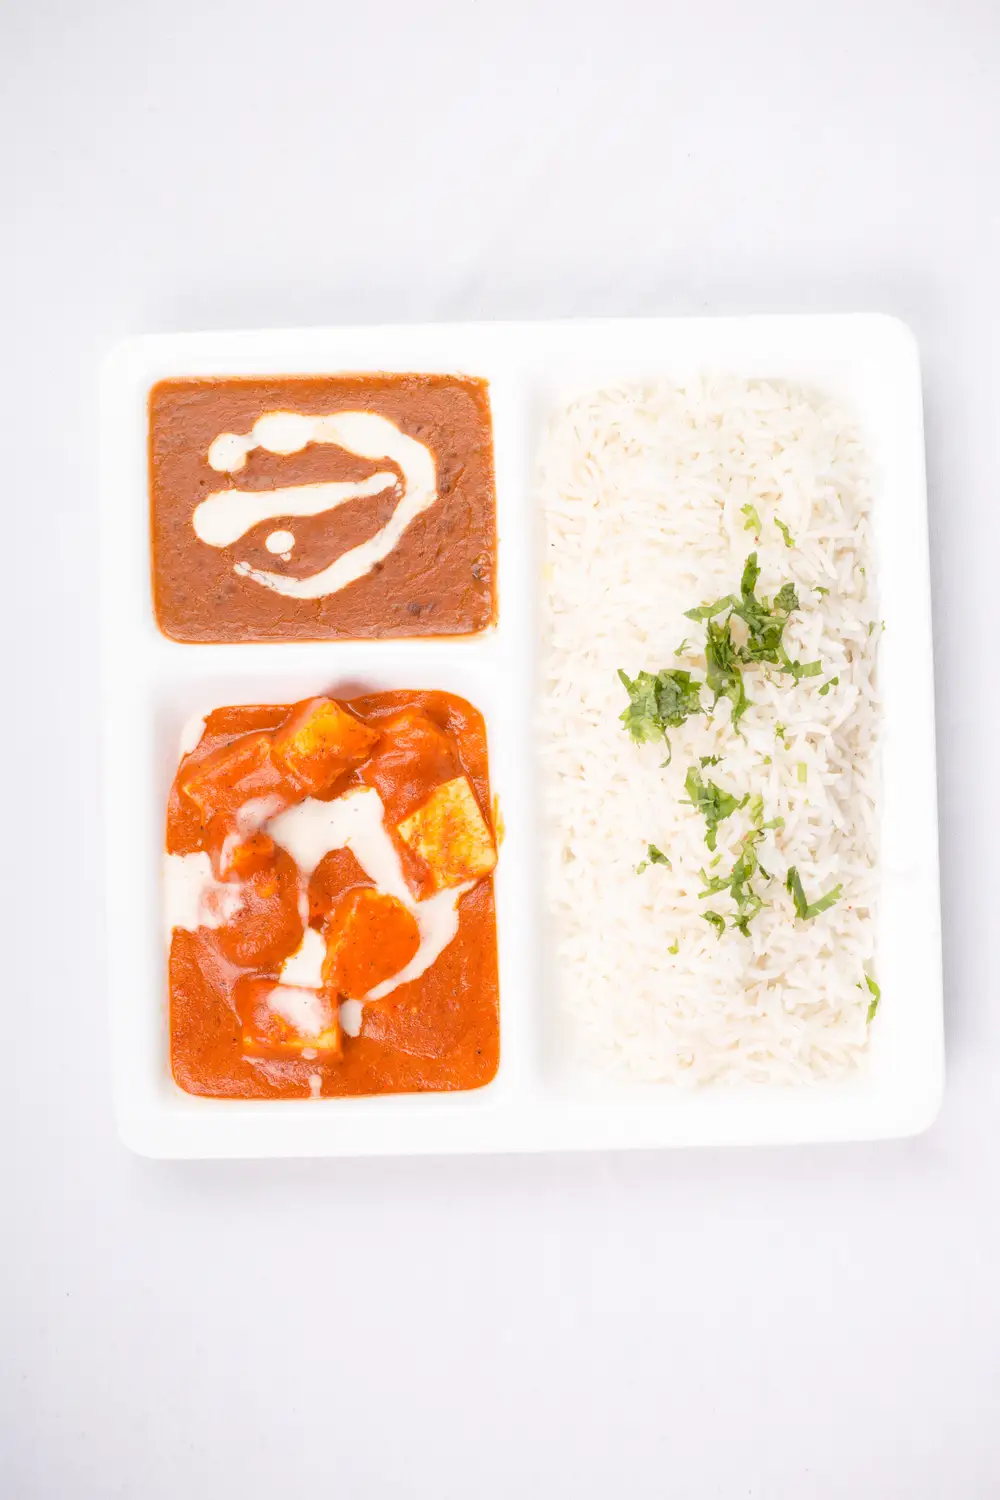 White rice served with sauce